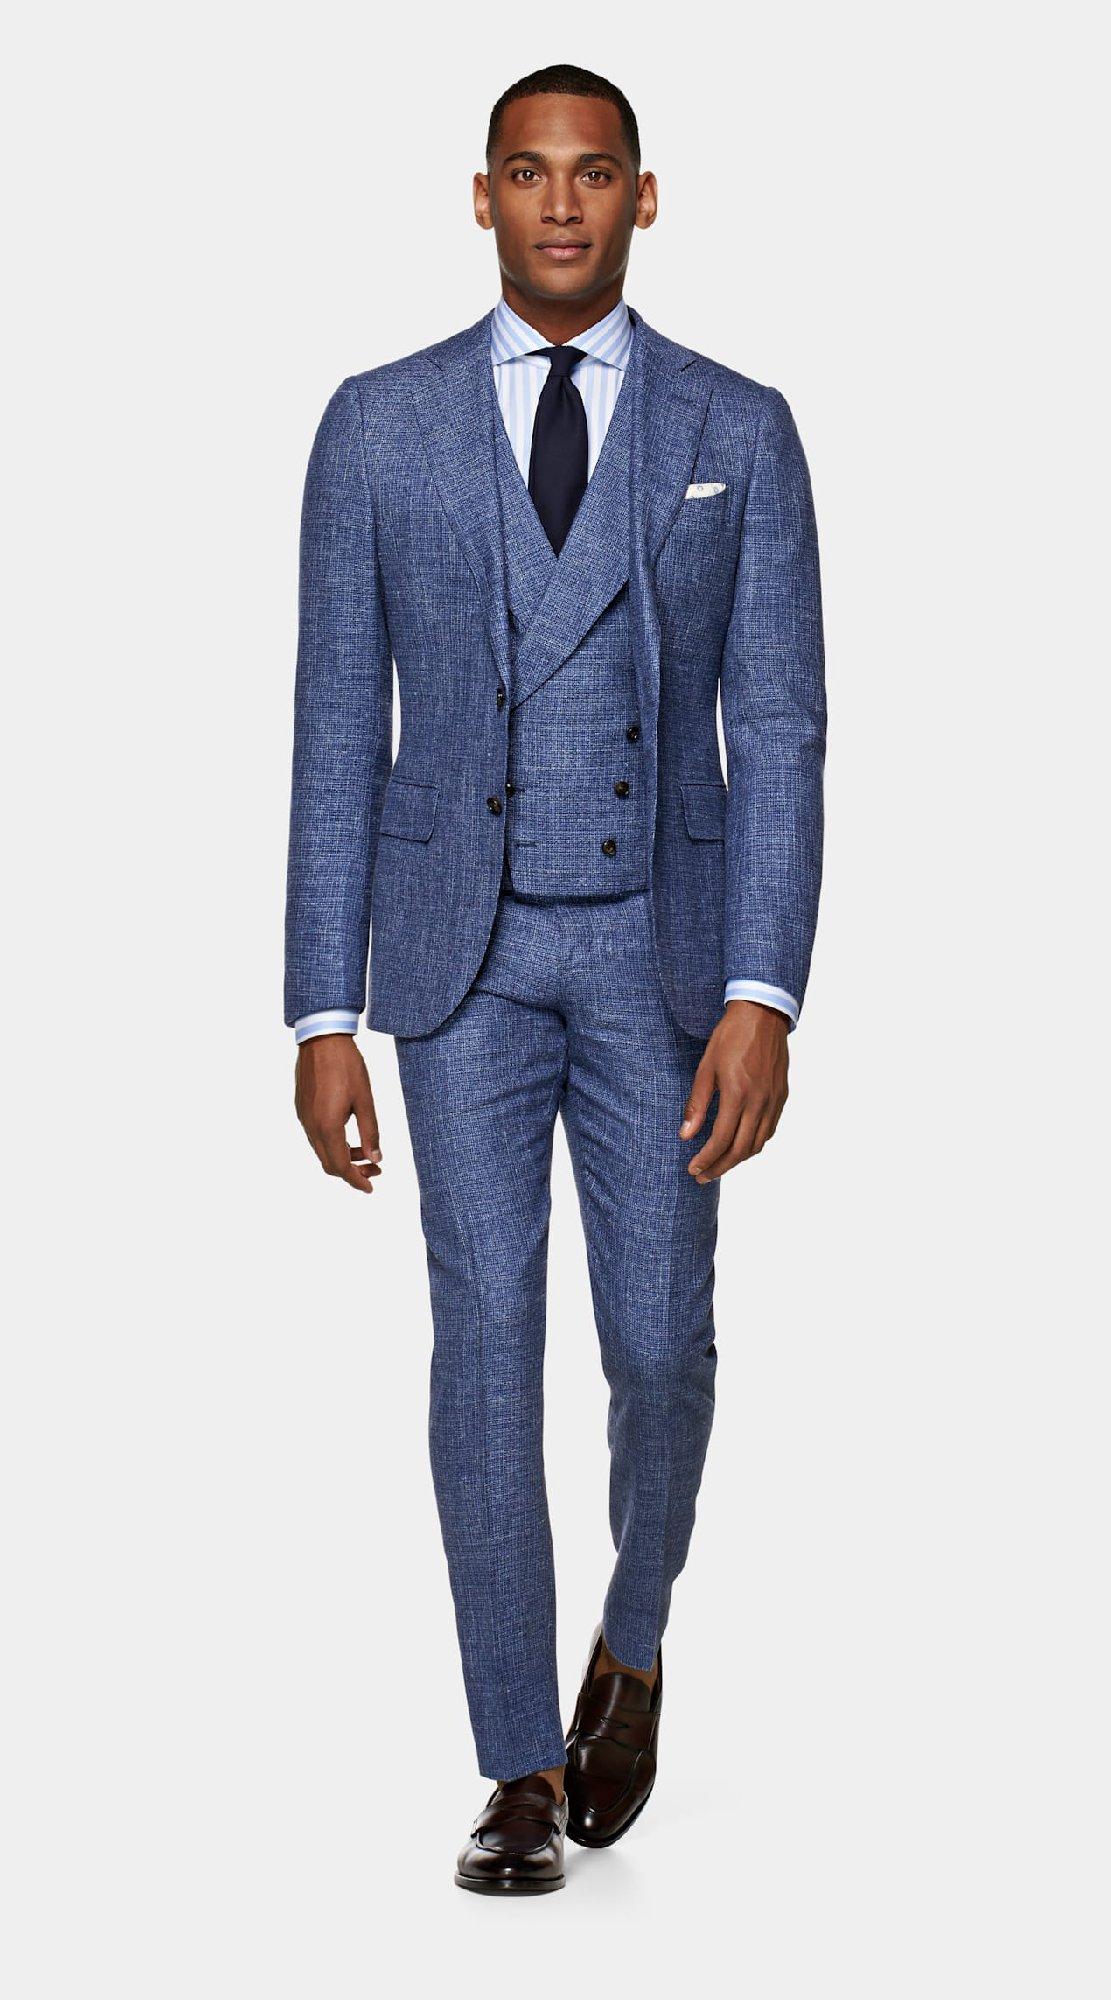 21 On-Trend Summer Wedding Suits for Every Dress Code